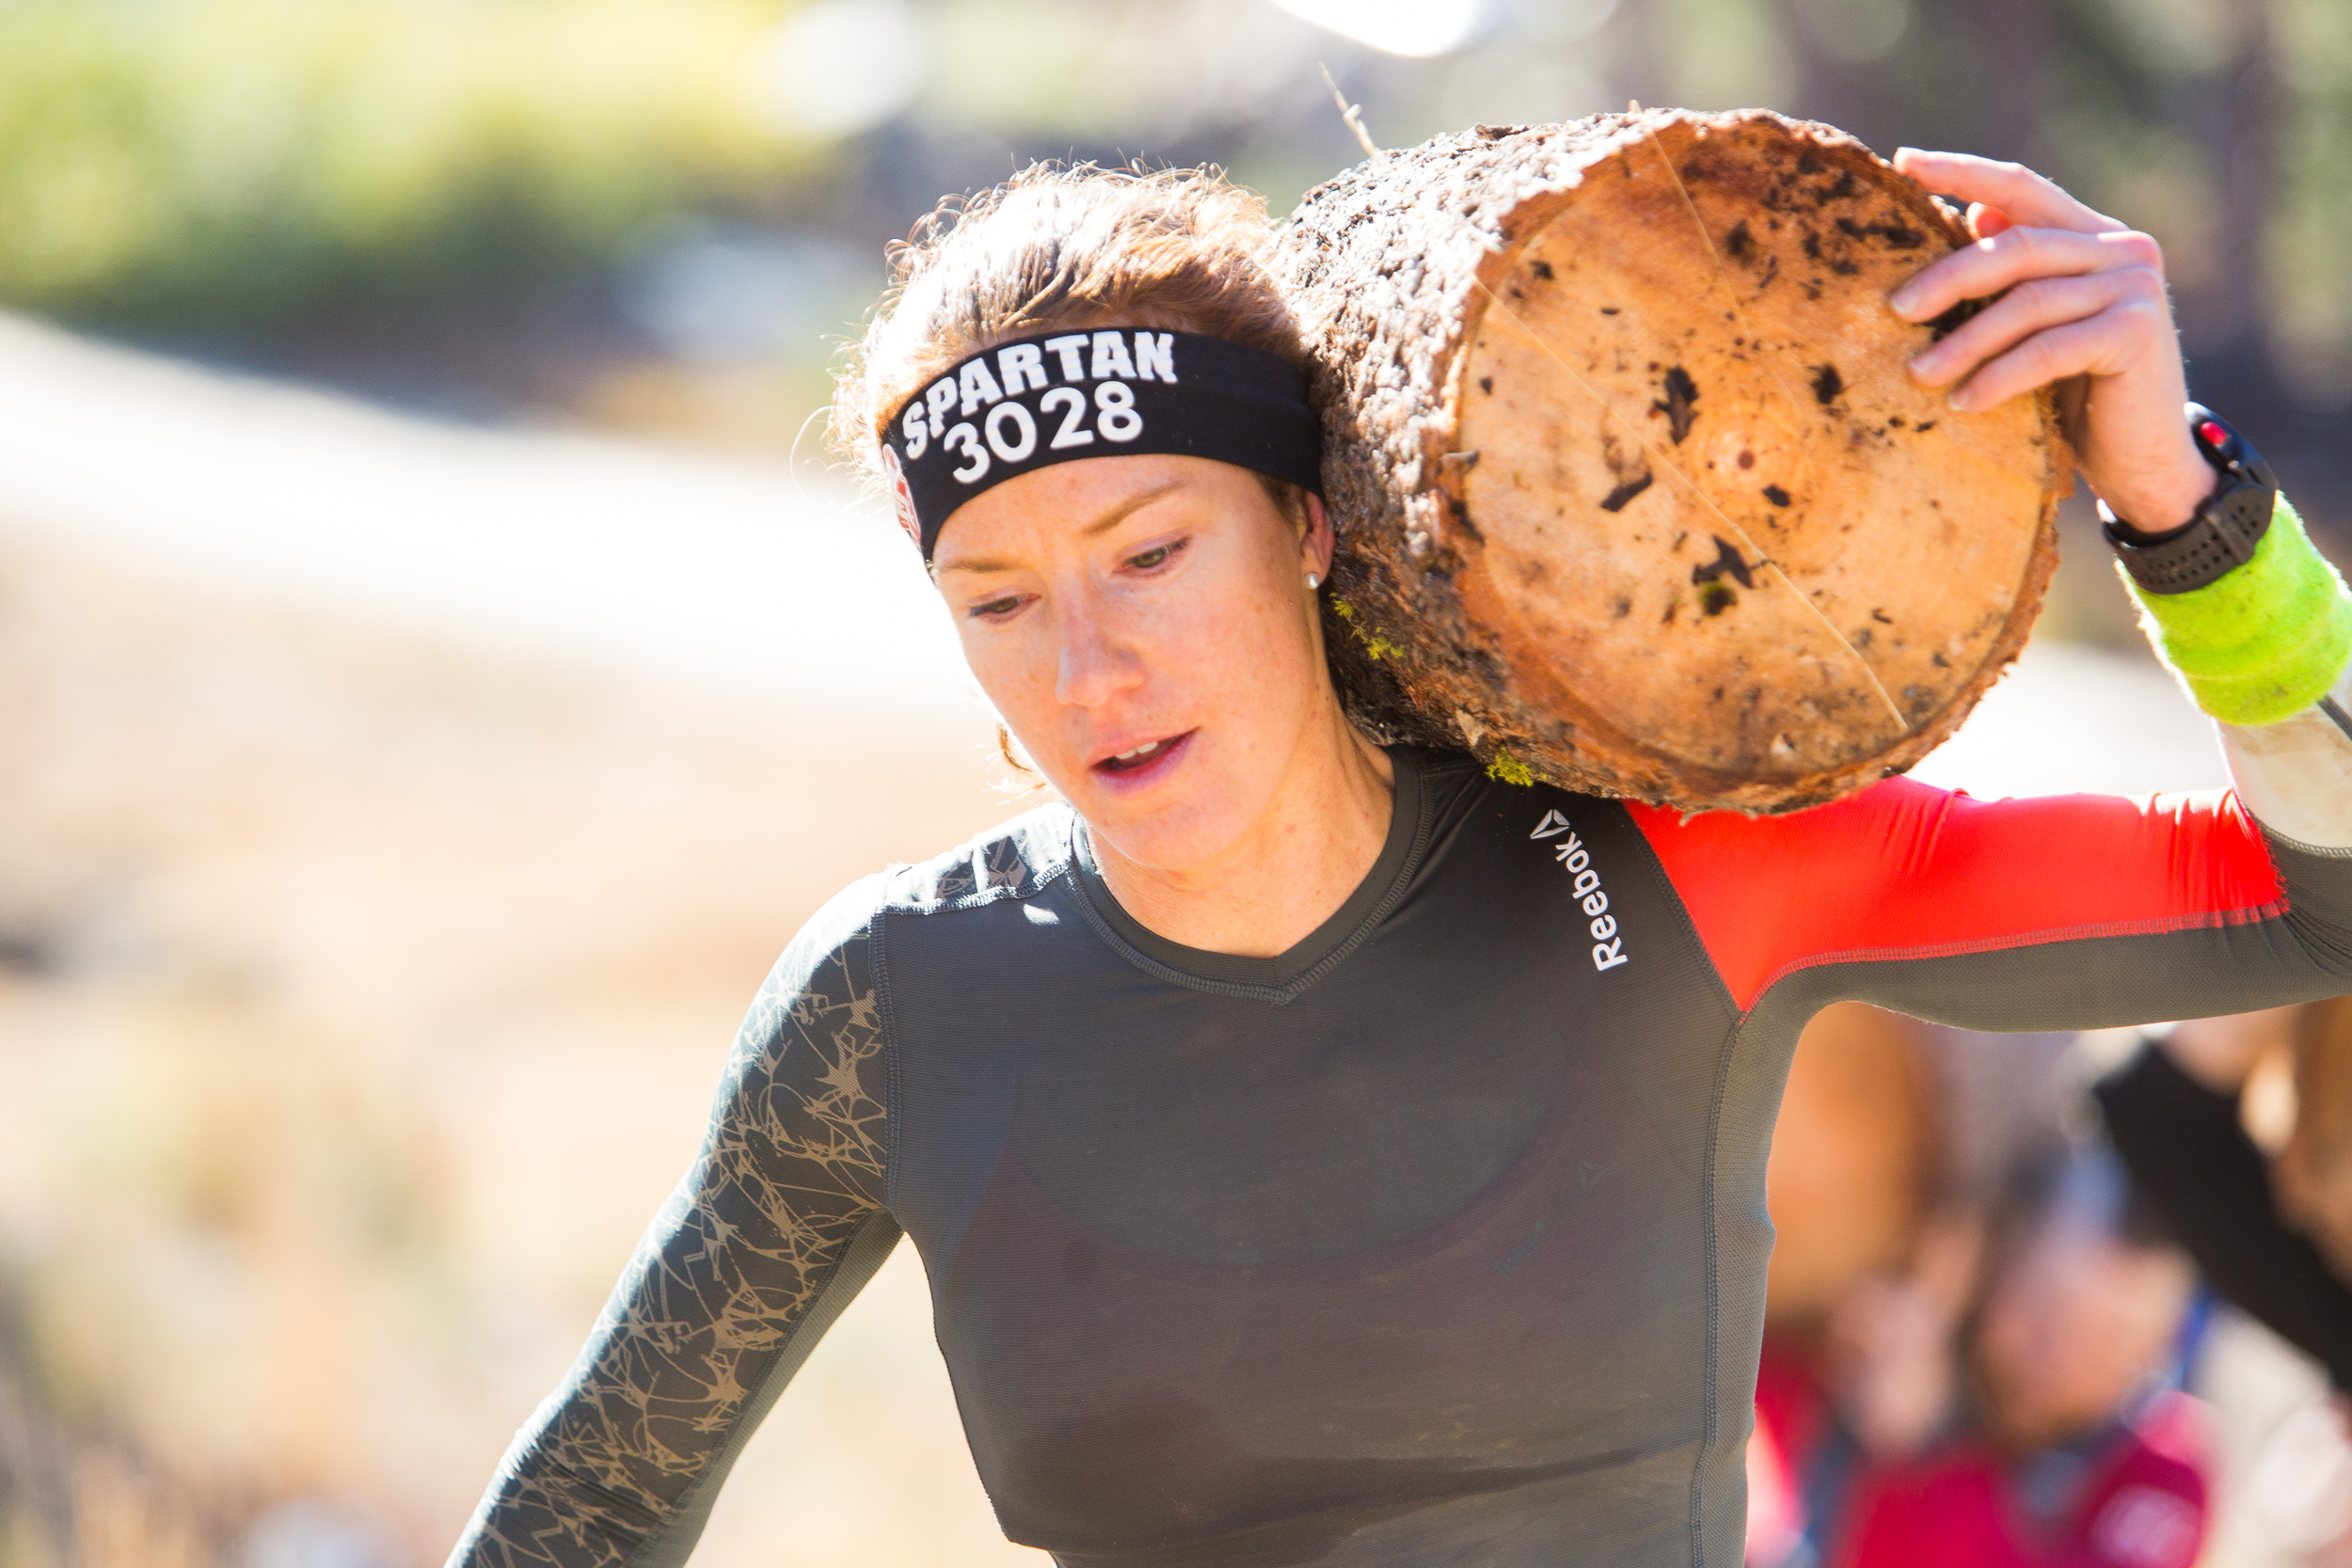 Log carrying in the Spartan World Championships. Photo from Reebok